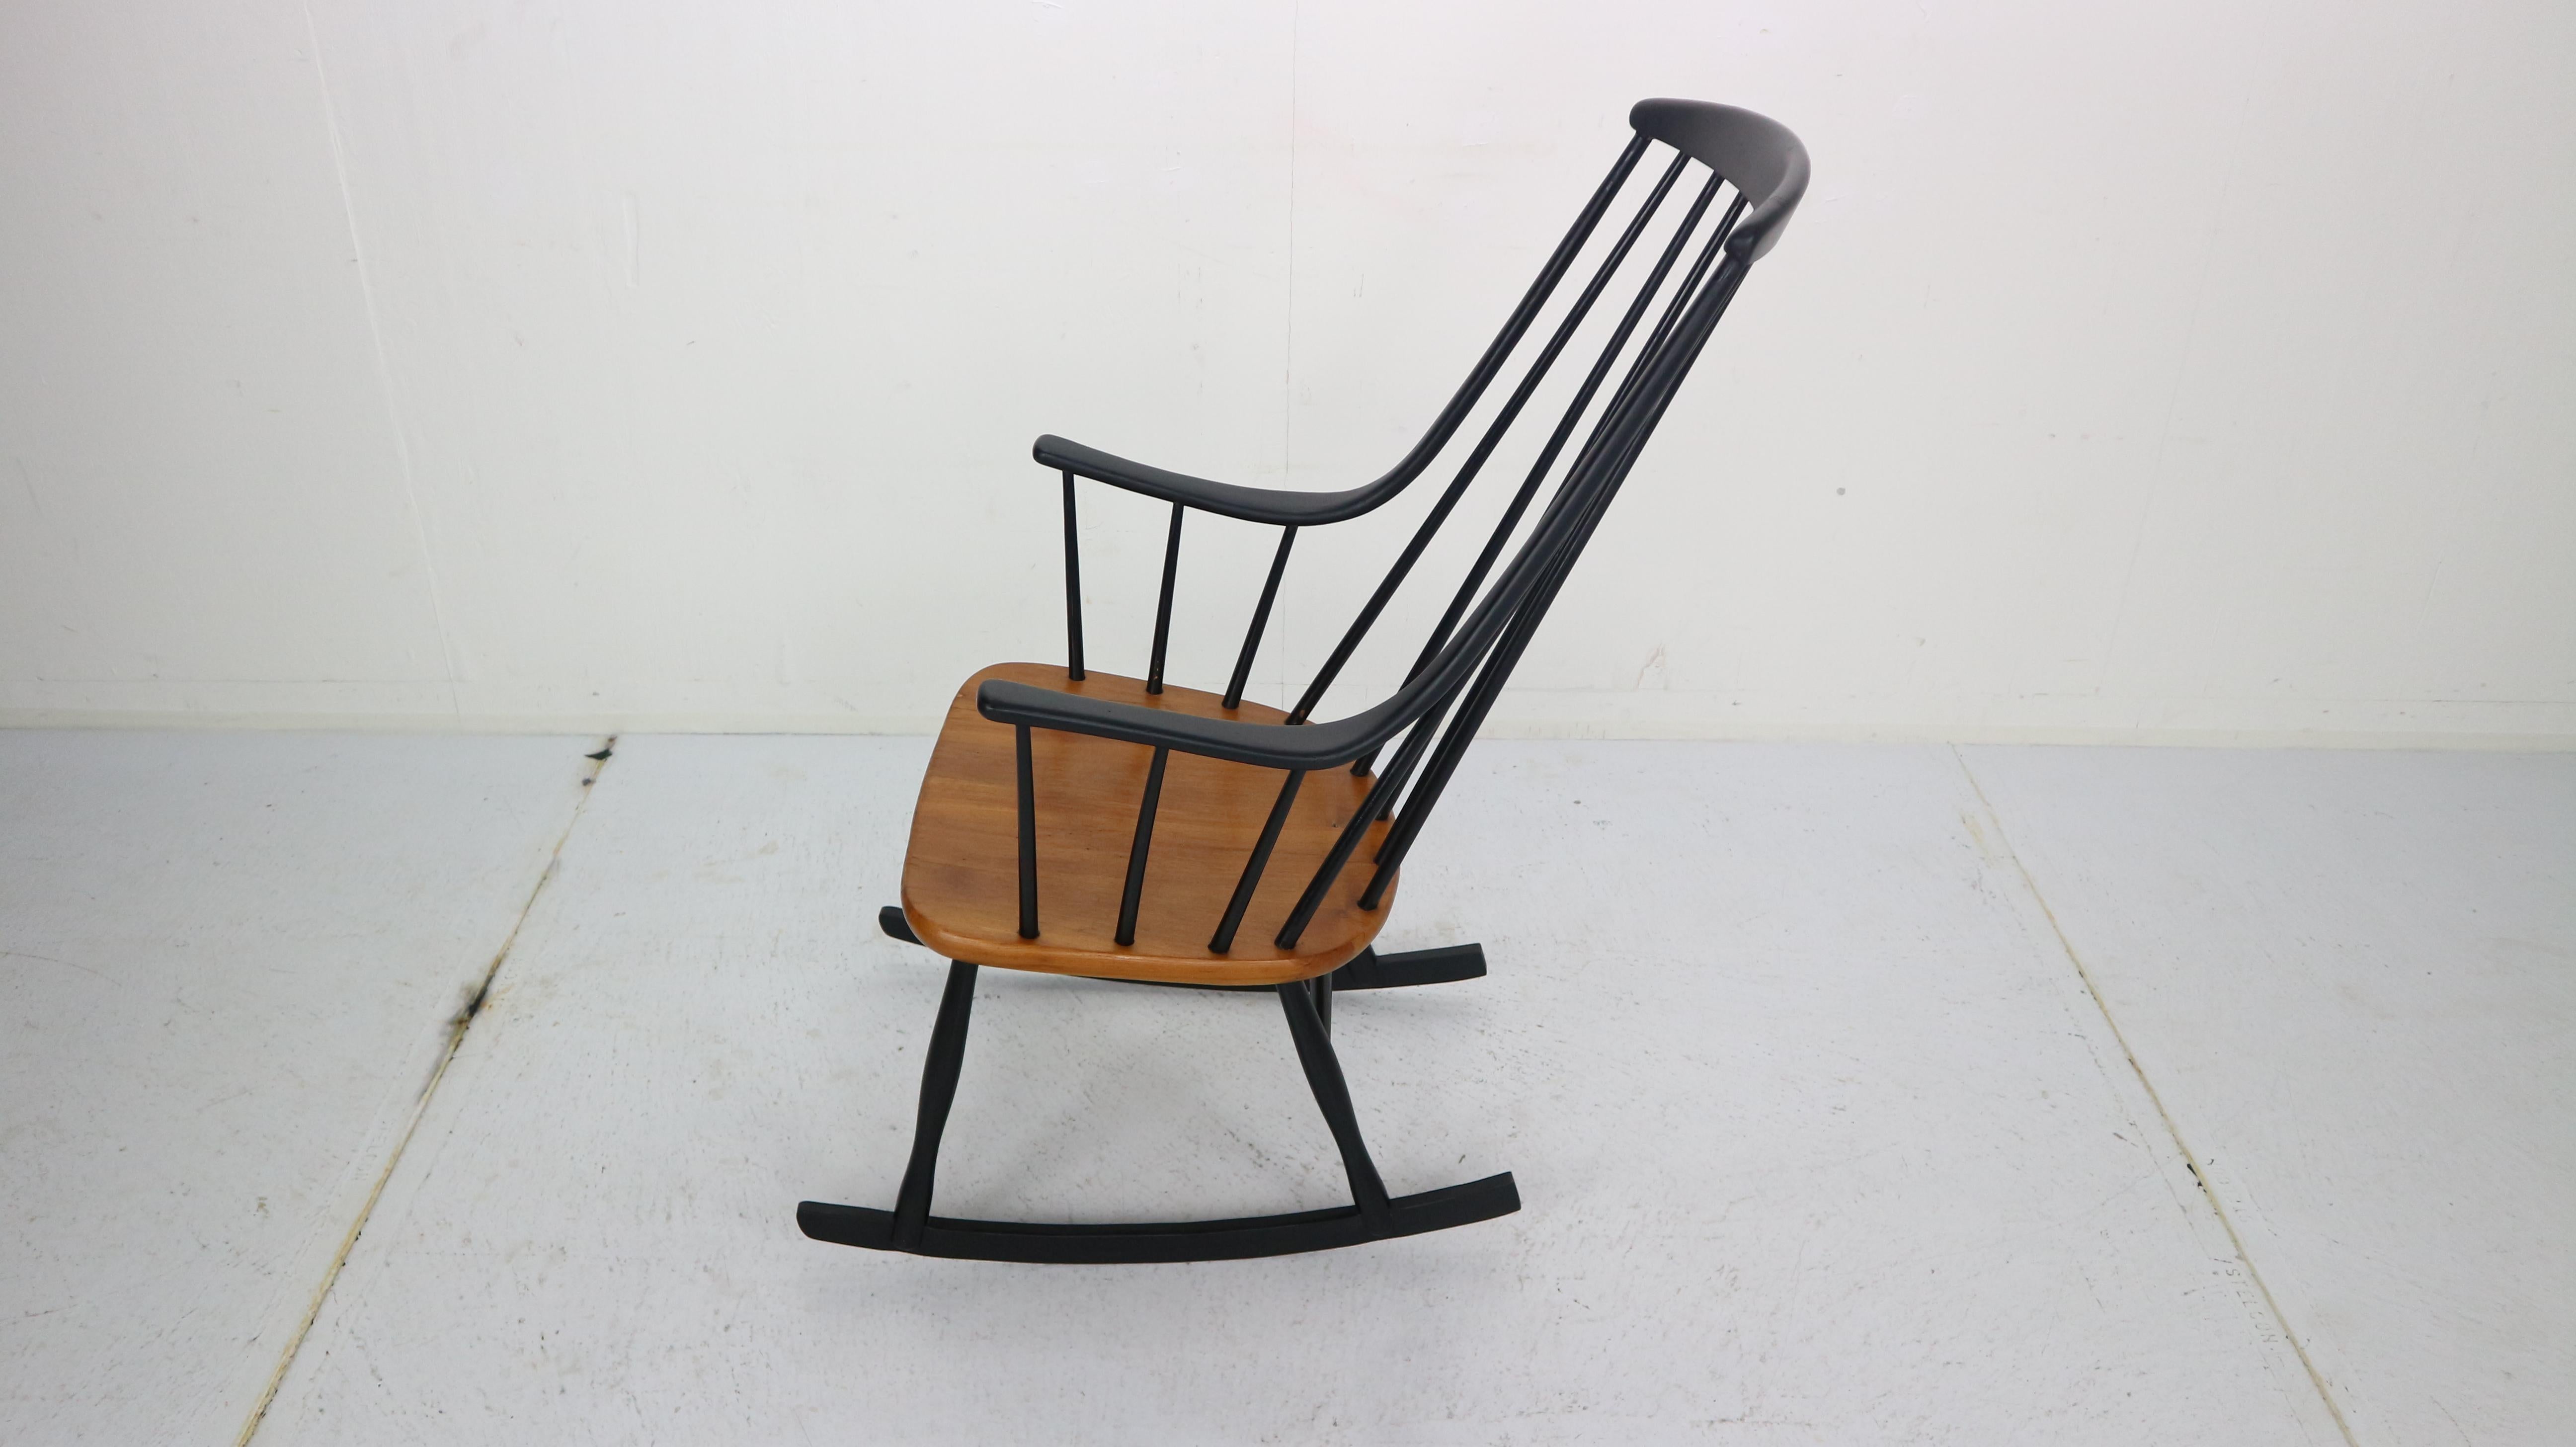 Mid-20th Century ‘Grandessa’ Wooden Rocking Chair by Lena Larsson For Nesto, 1960s